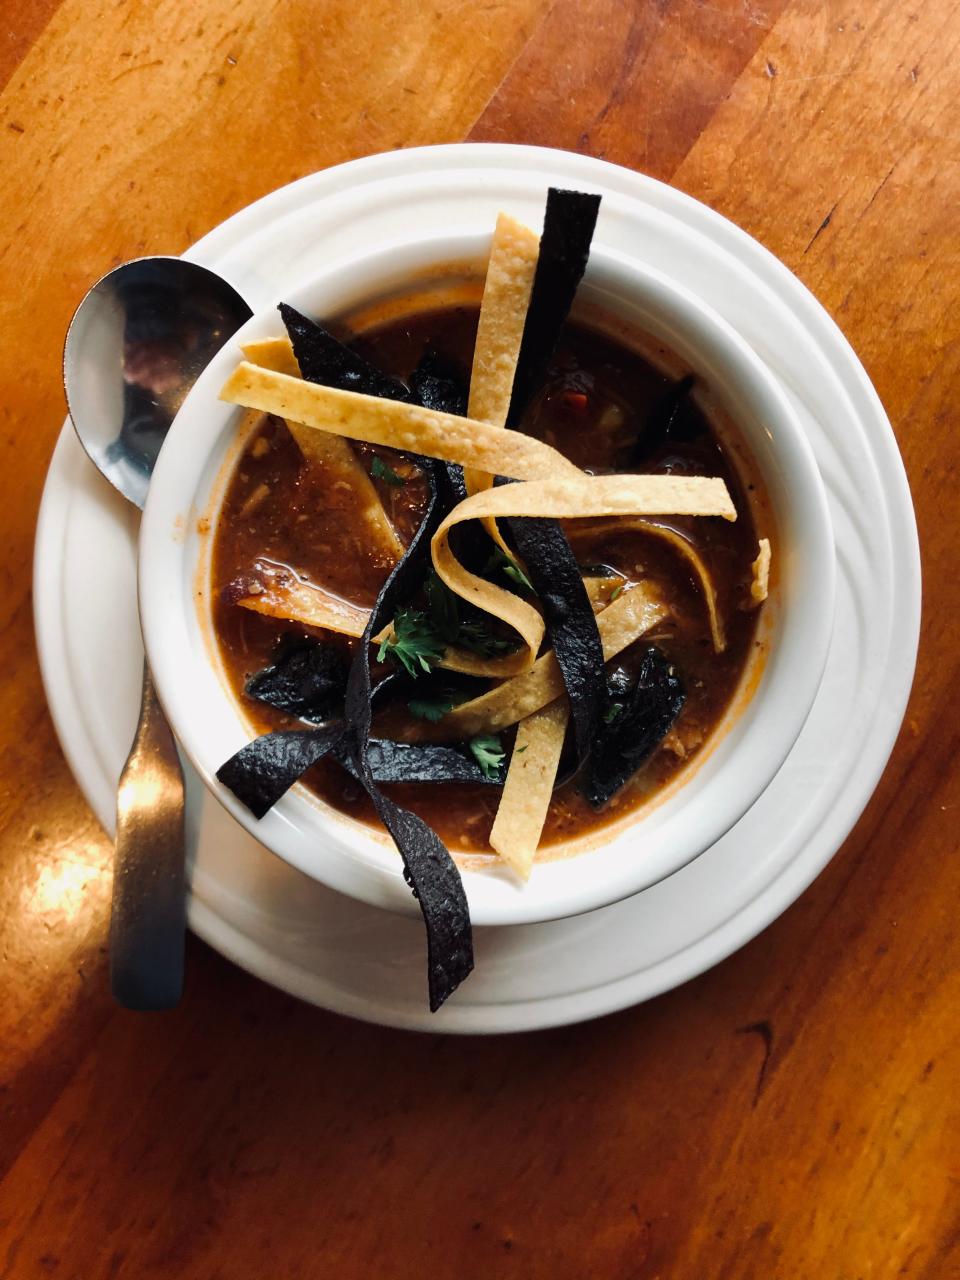 Chicken tortilla soup is sometimes available at Lennie's.